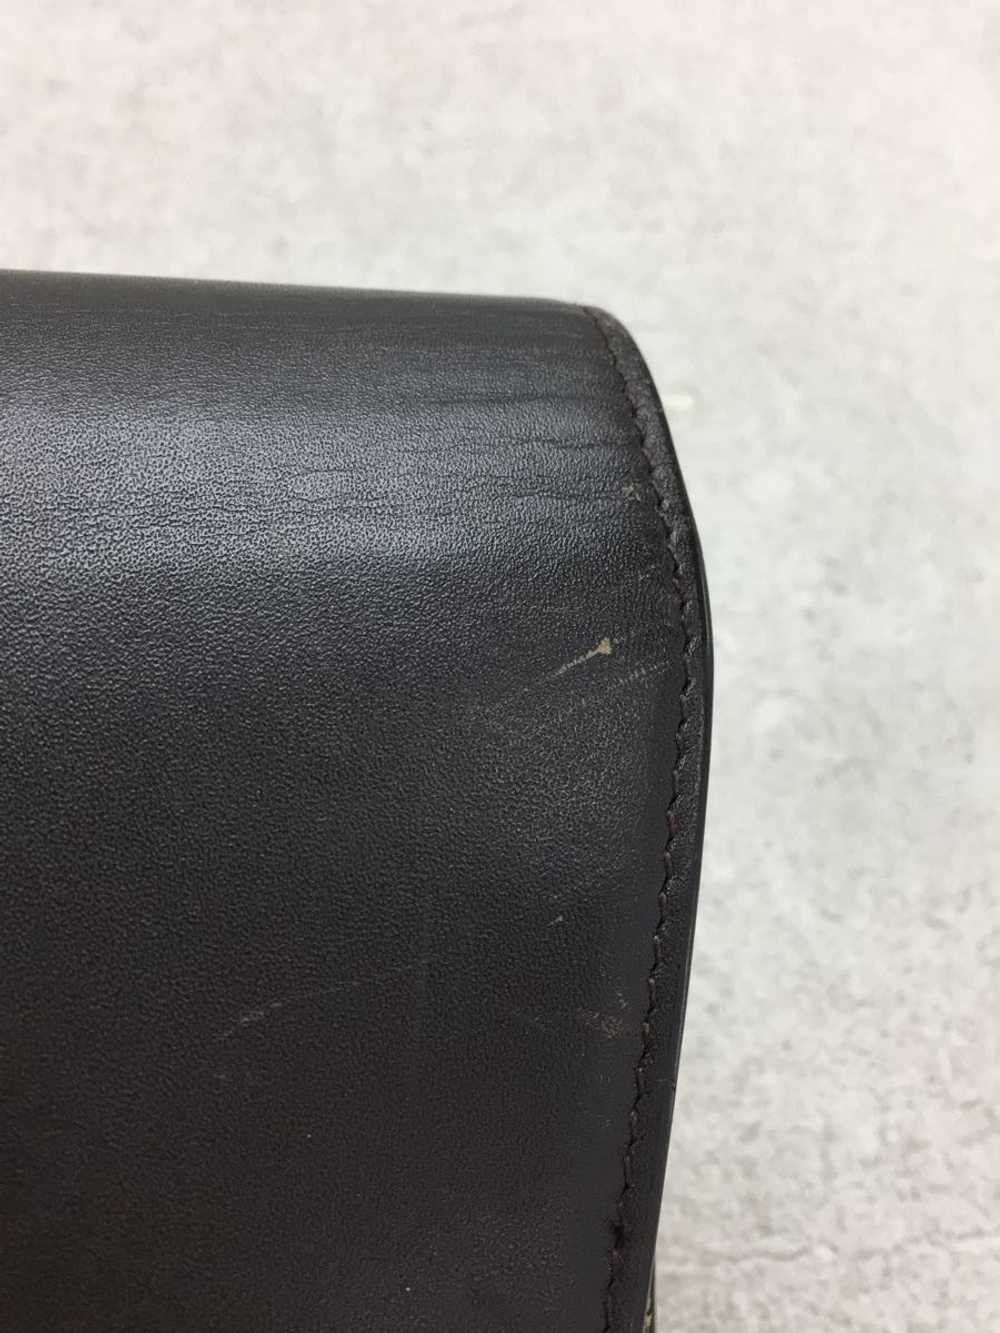 Used Gucci Scratches/Scratches/Dirty/Gg Supreme/C… - image 8